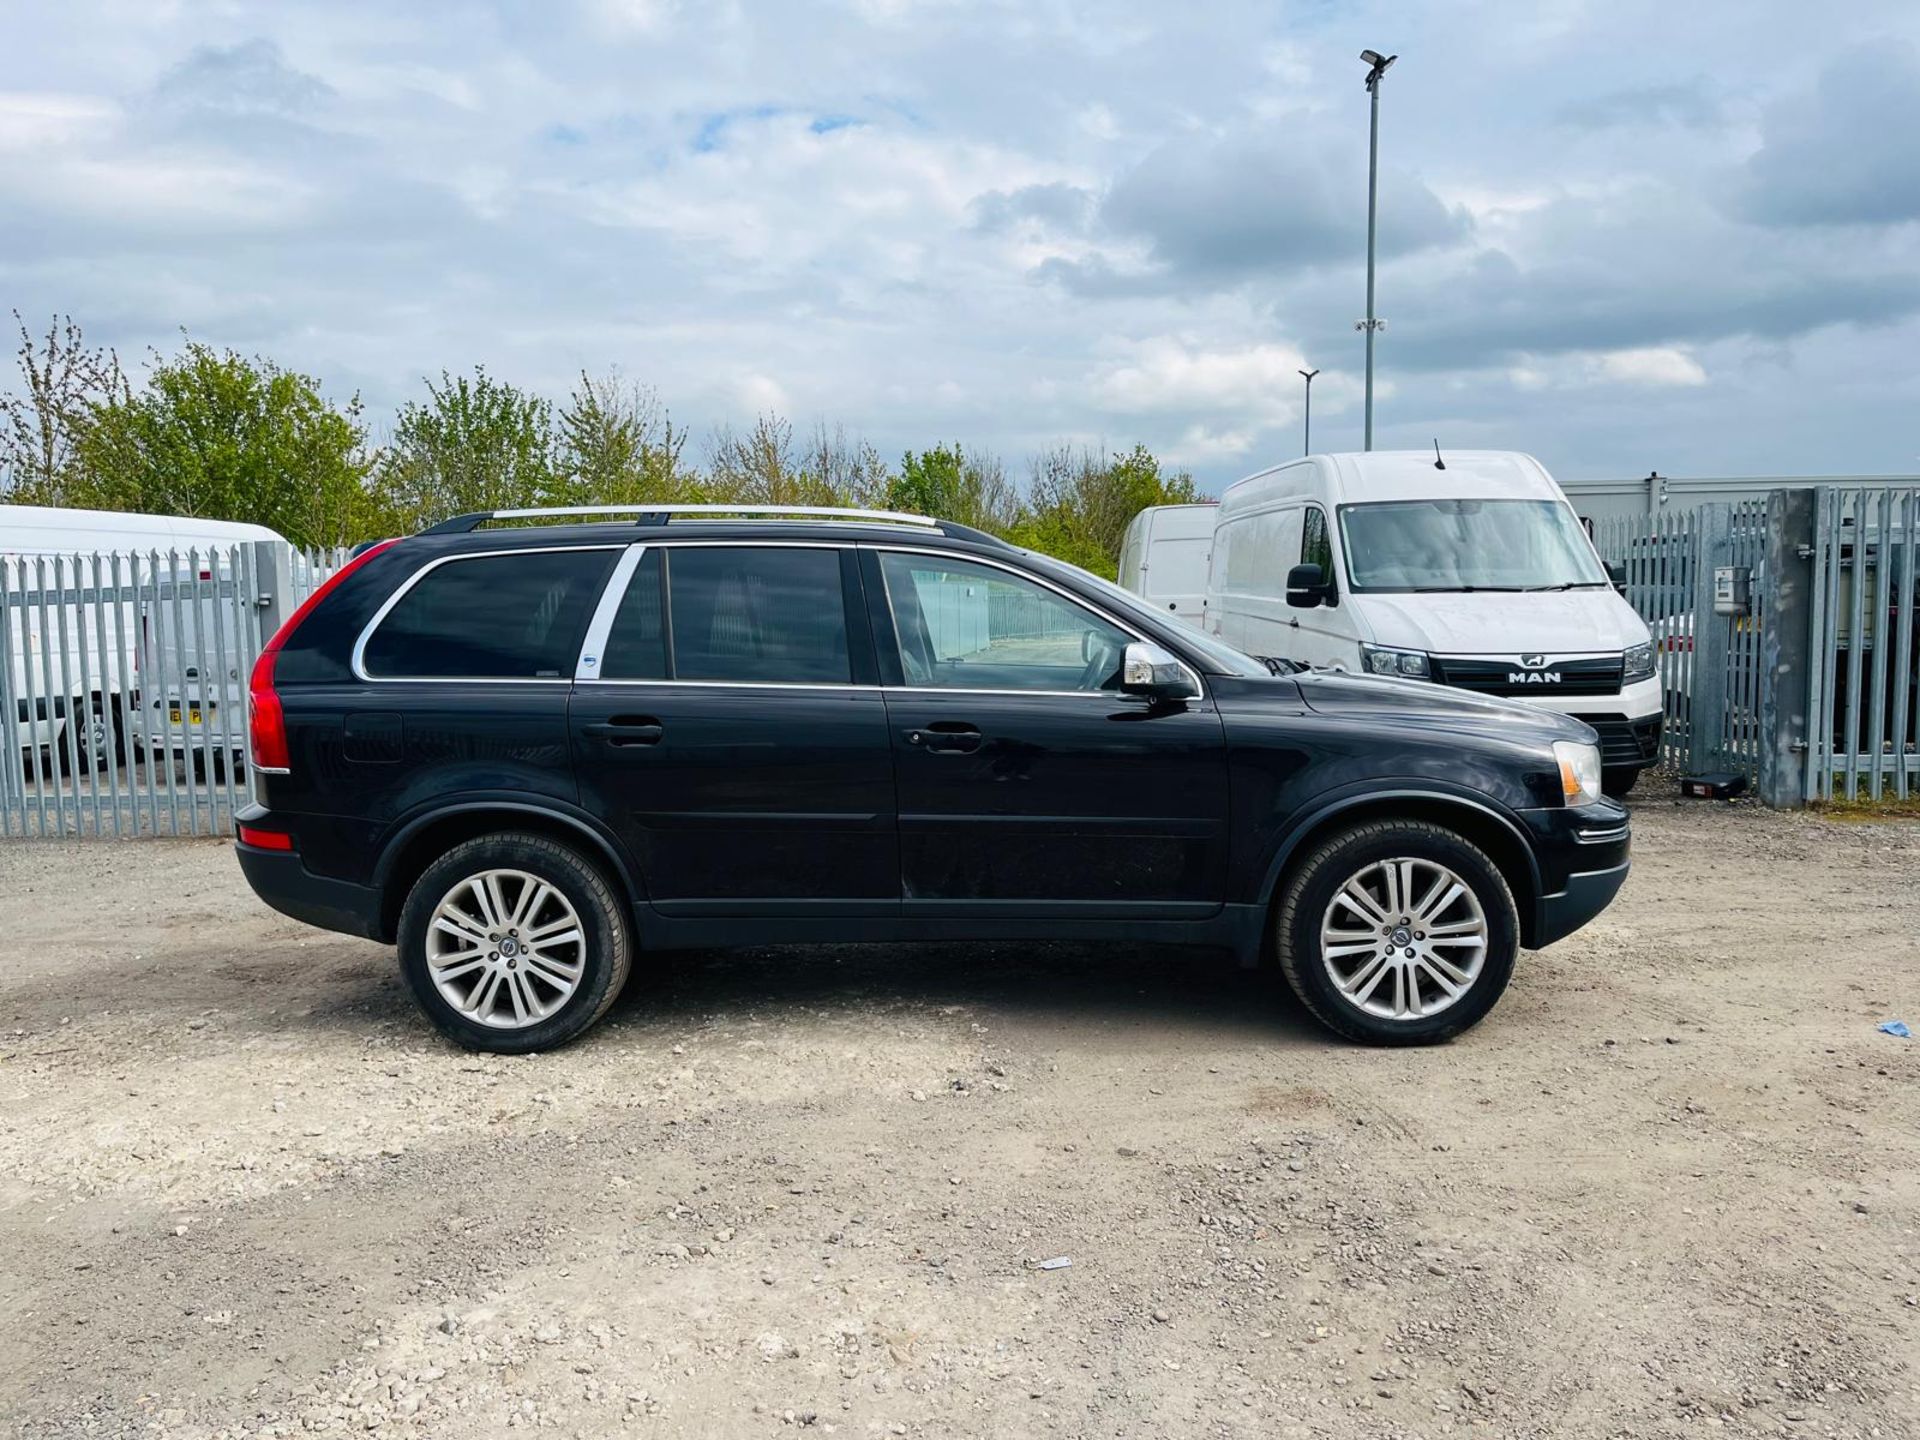 ** ON SALE ** Volvo XC90 2.4 D5 185 Executive G/T Estate 2009 '59 plate' - Climate Control - Image 10 of 31